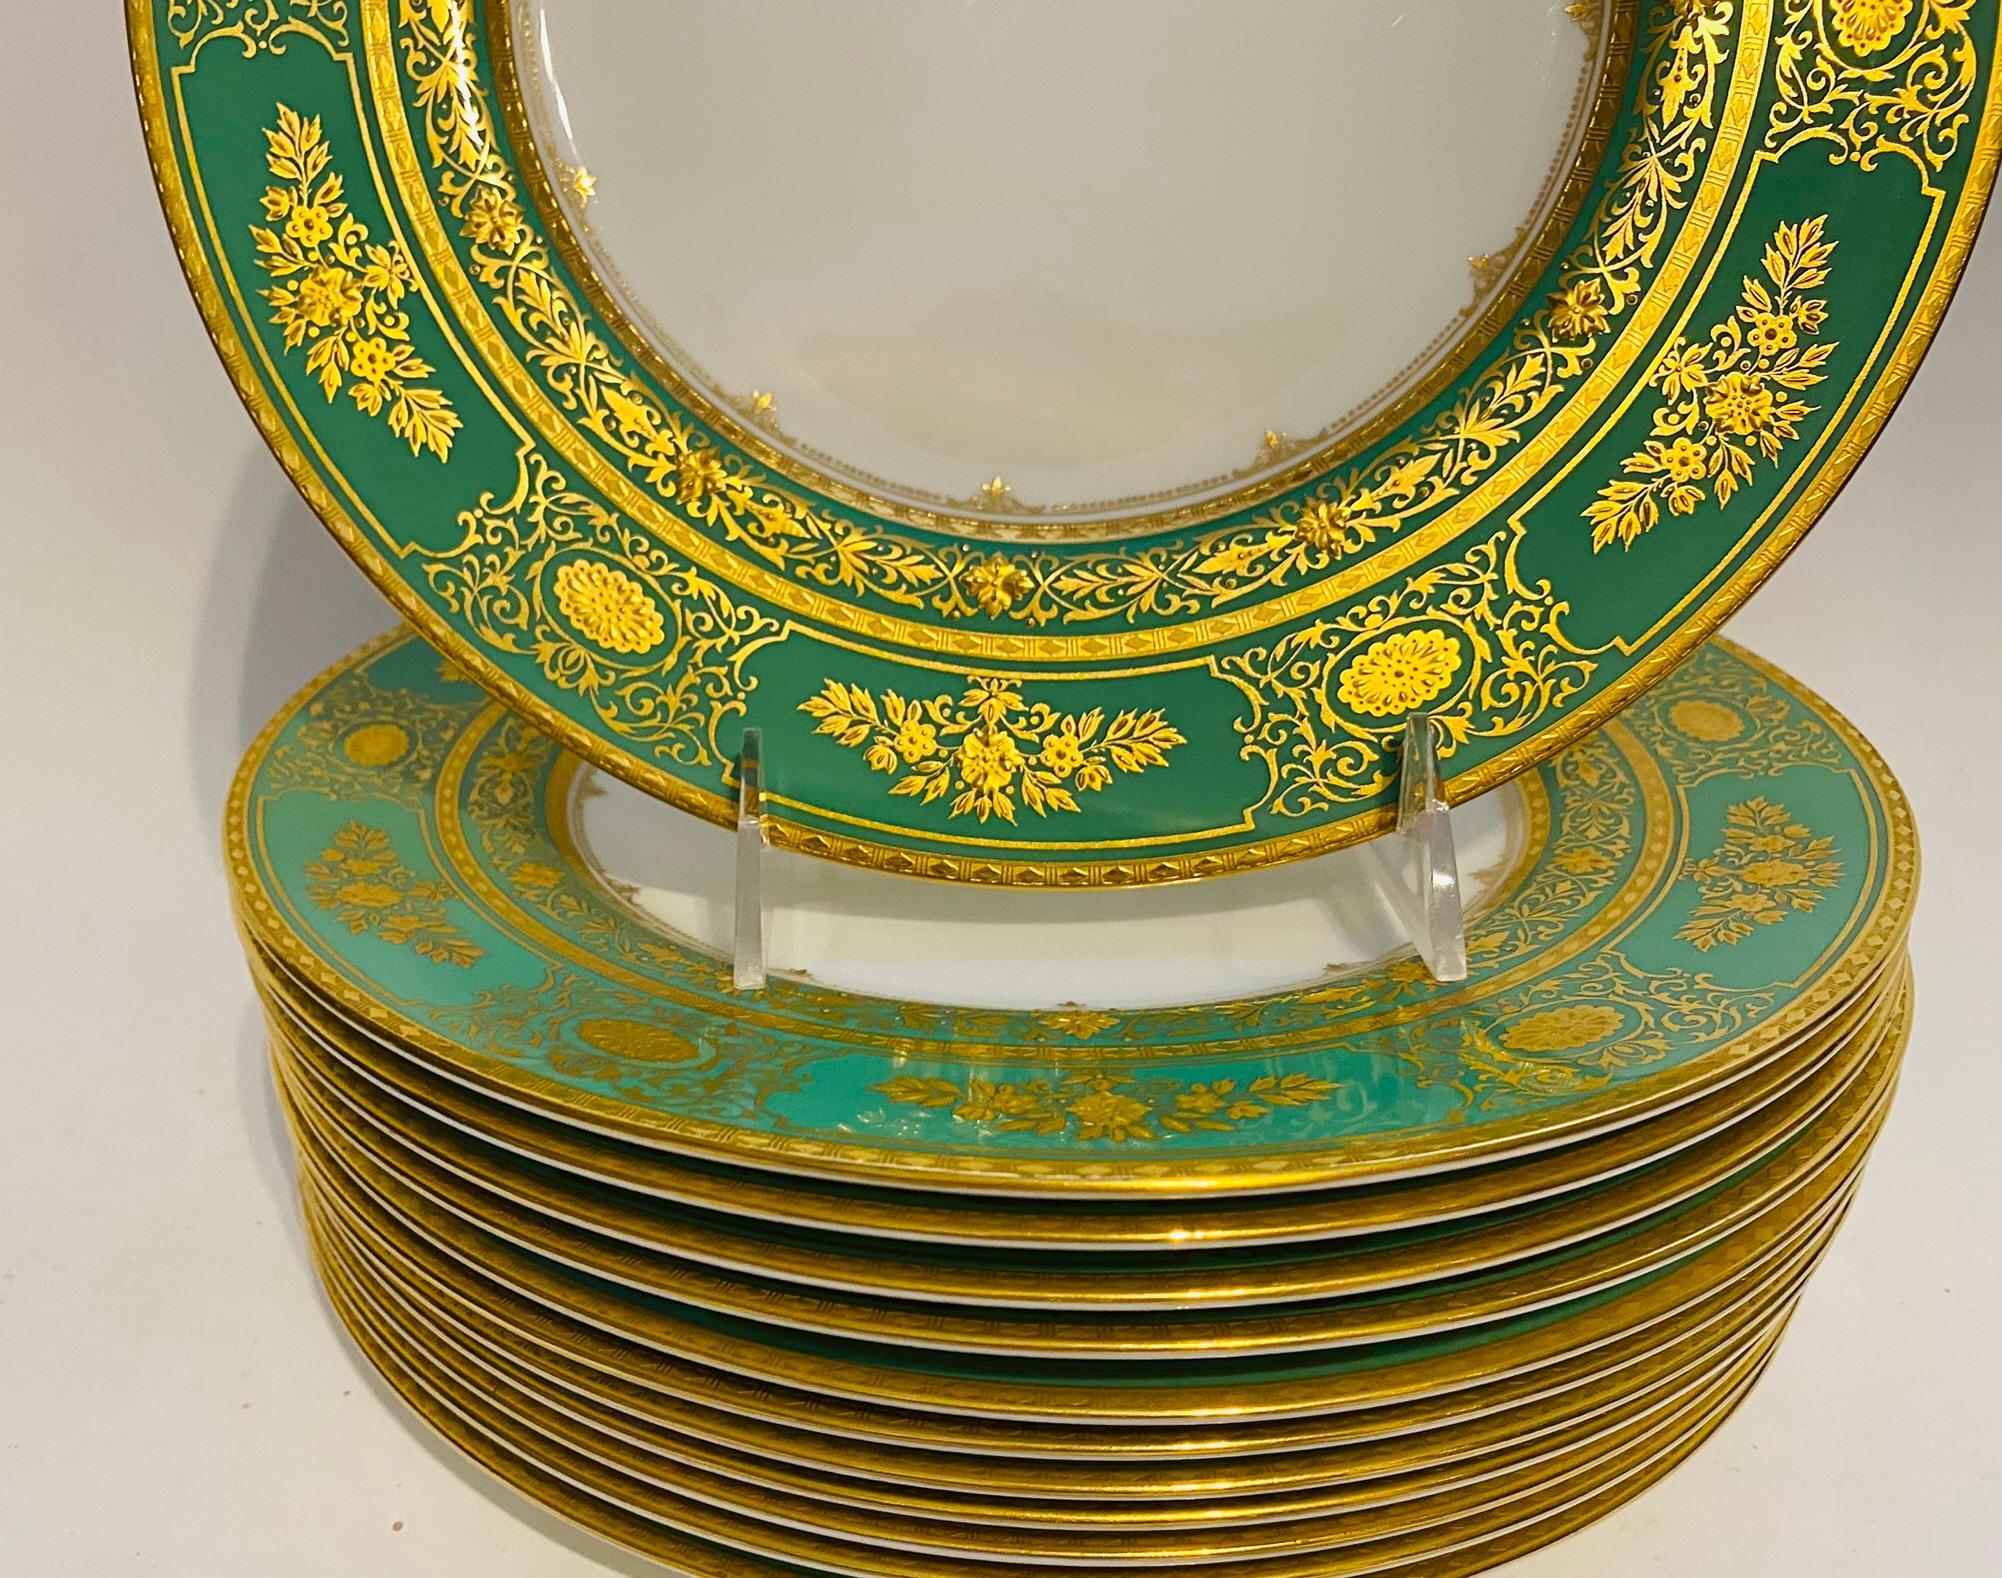 British 12 Tiffany Green & Gold Encrusted Dinner Plates, Vintage Circa 1950's by Minton